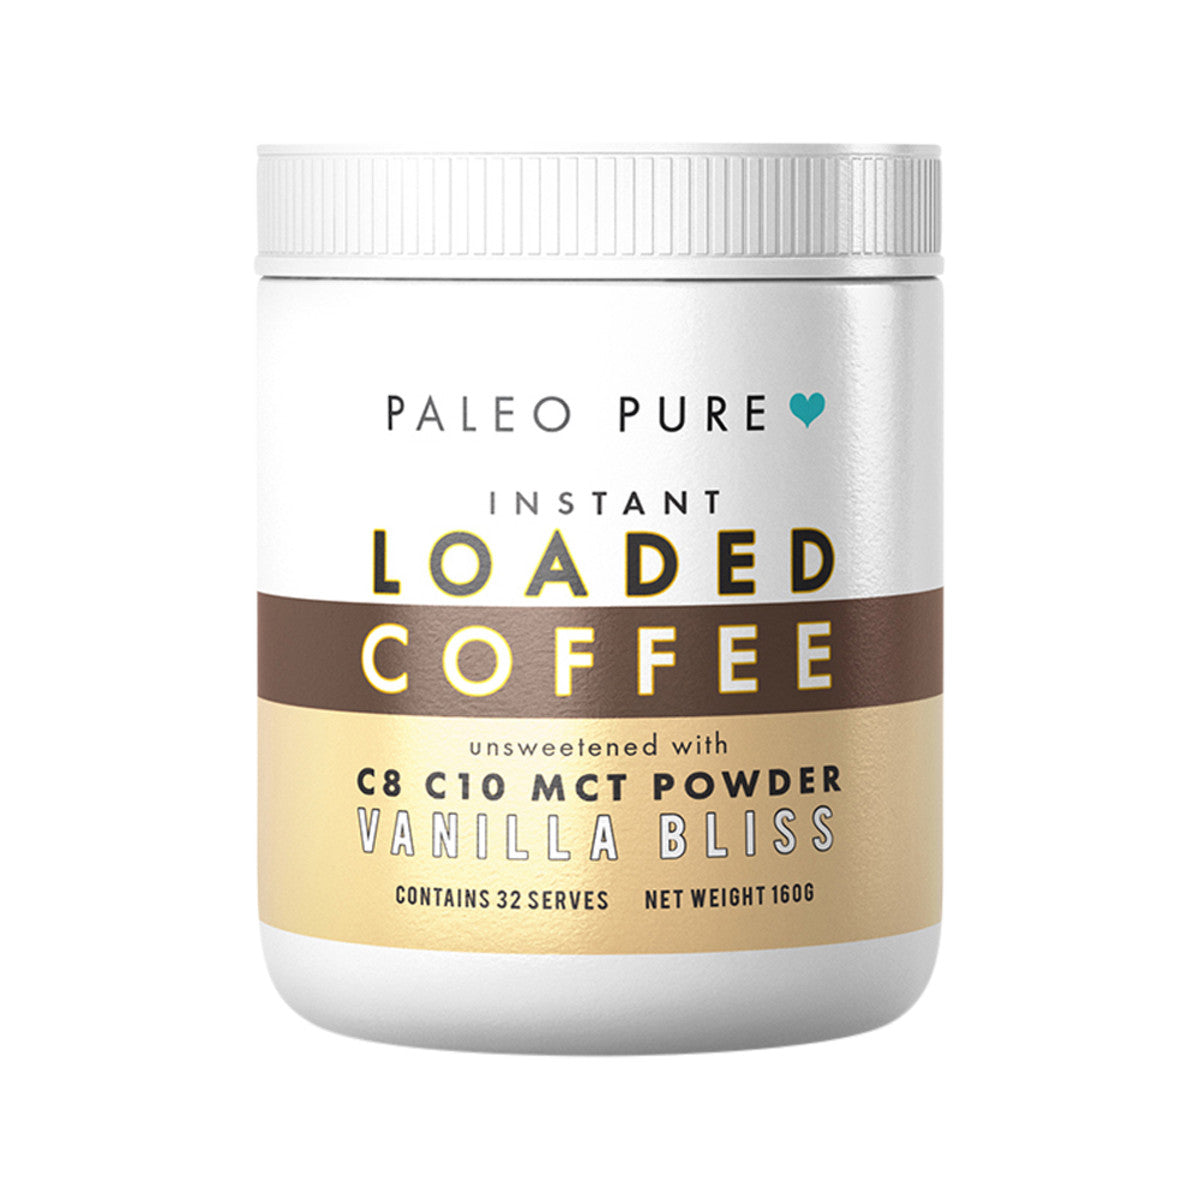 Paleo Pure Instant Loaded Coffee Vanilla Bliss 160g